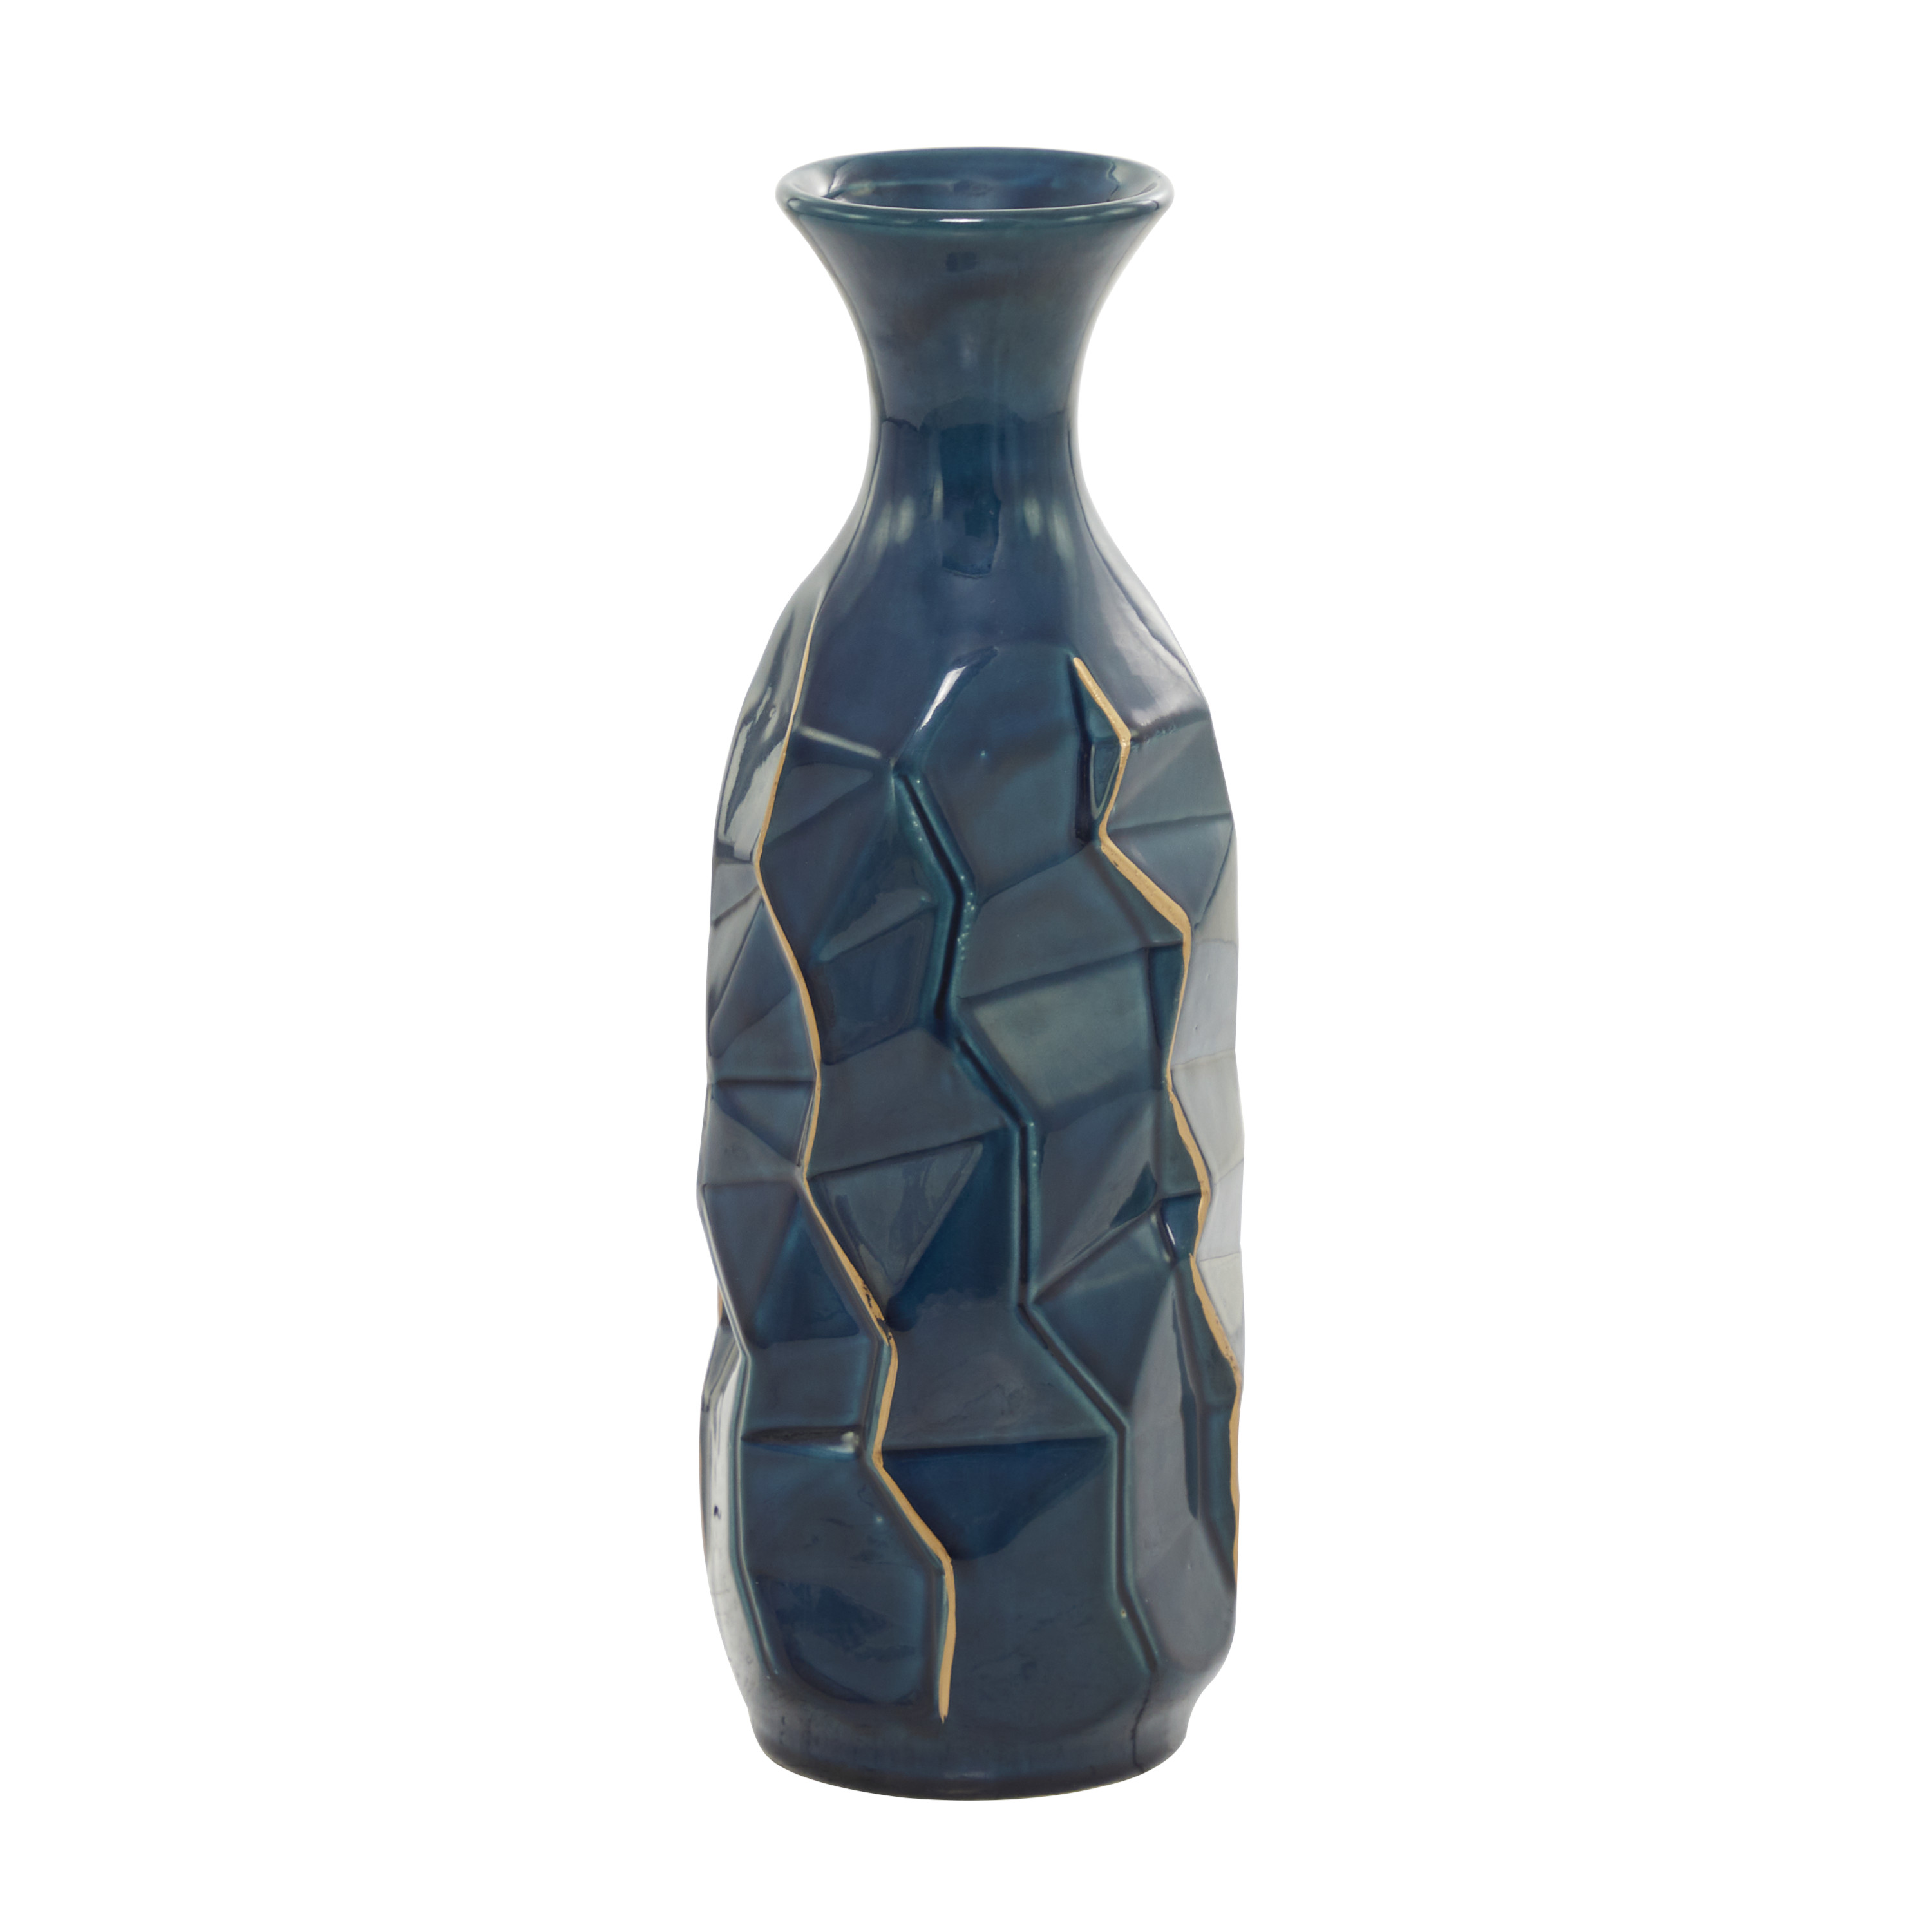 DecMode Blue Ceramic Modern and Coastal Vase 5"W x 15"H, featuring Minimalist Design with clean Lines and Angular Structures - image 1 of 12